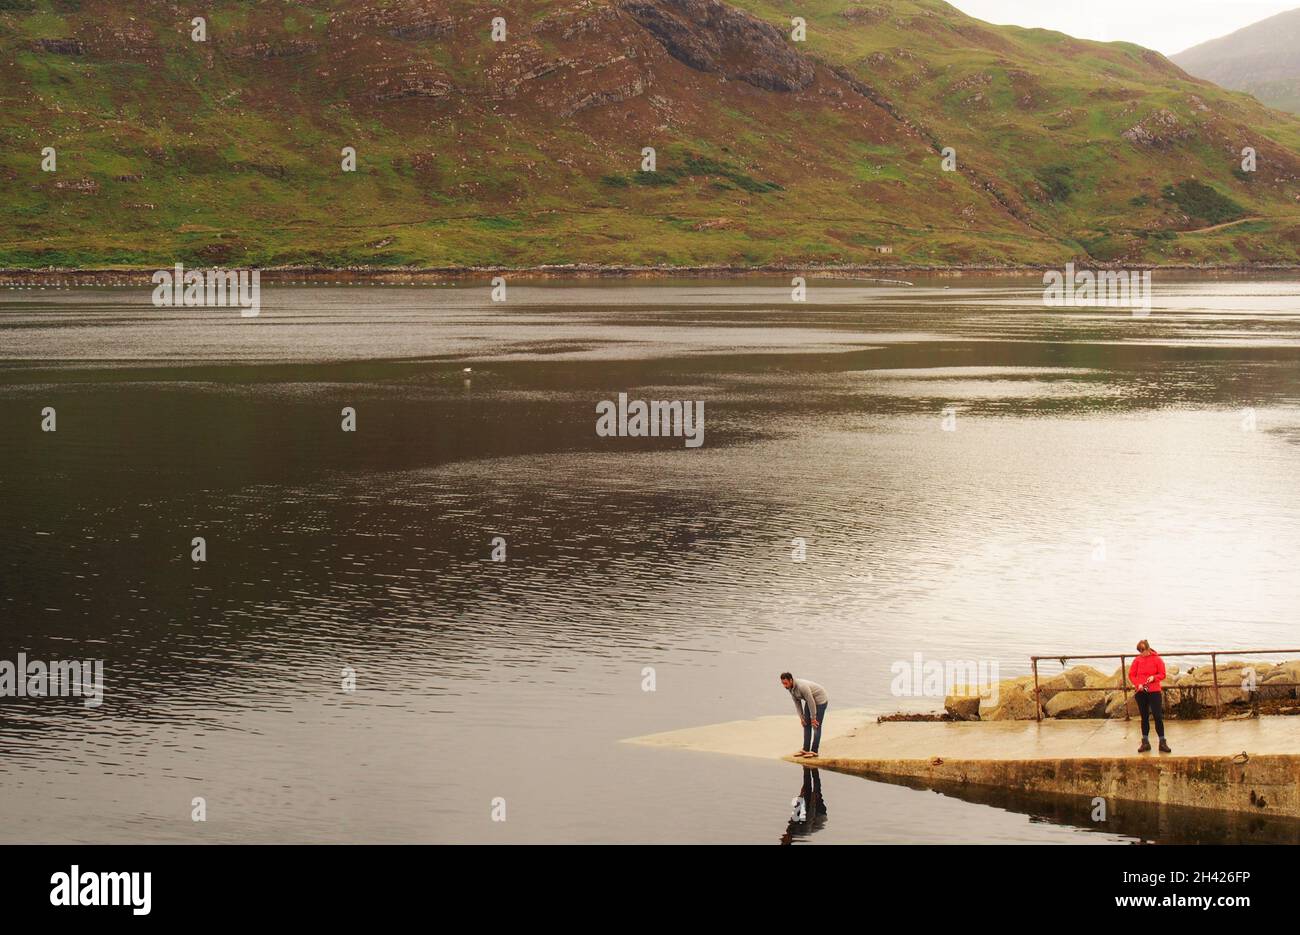 A young man and woman fishing on a slipway at Kylesku pier by Loch Gleann |Dubh, Sutherland, Scotland Stock Photo